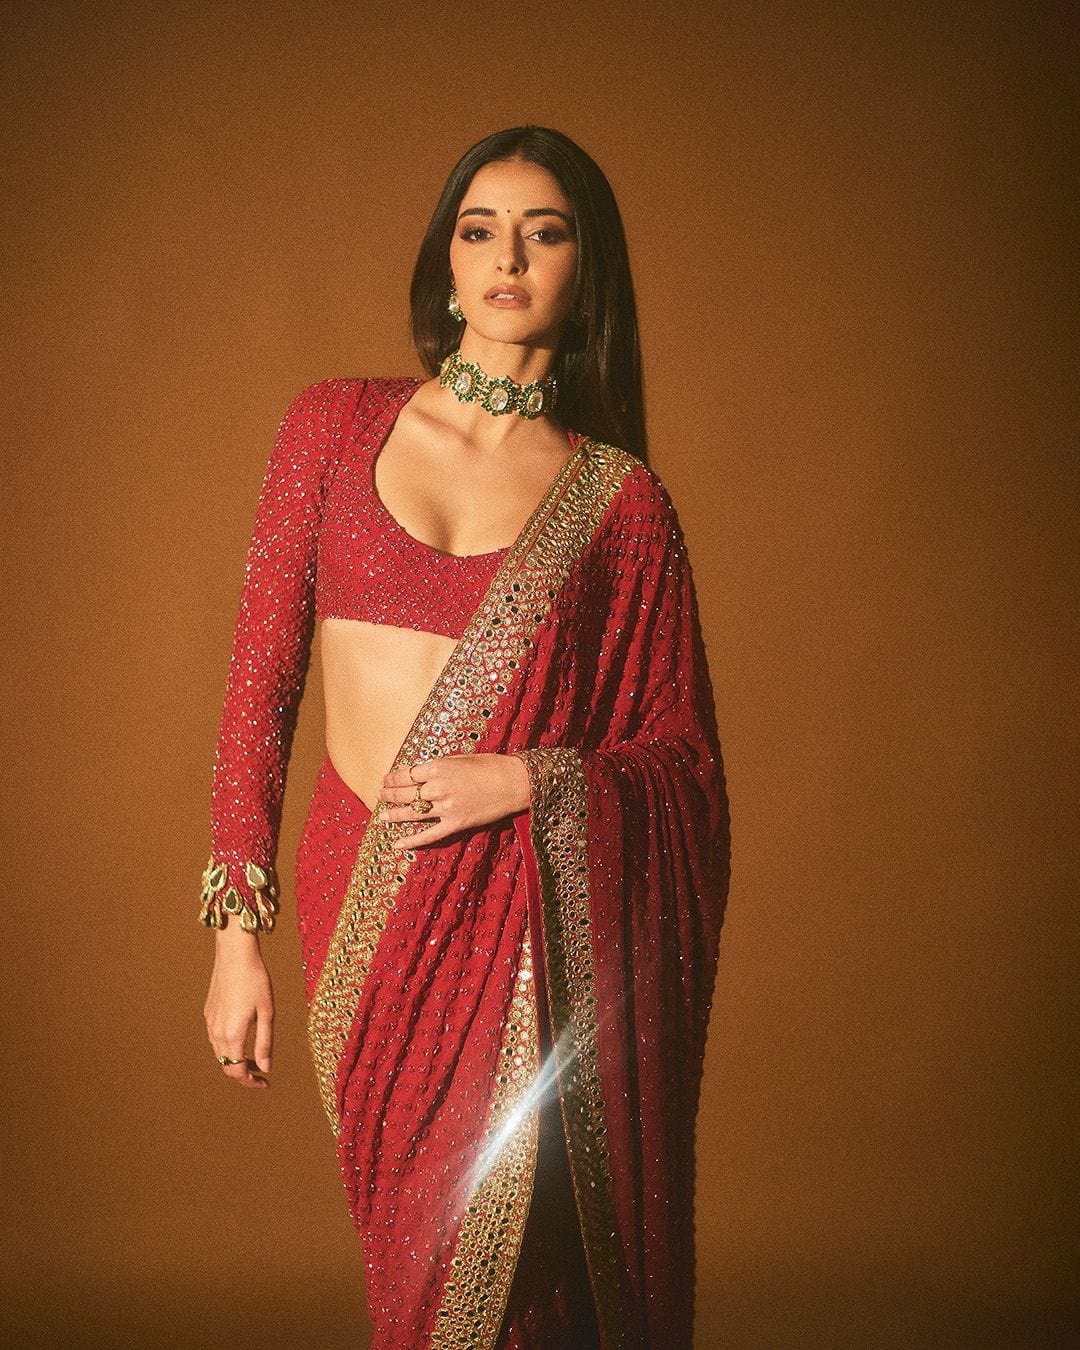 KD designer saree Red Ananya Pandey Inspired Red Saree with Sequin Embellishments